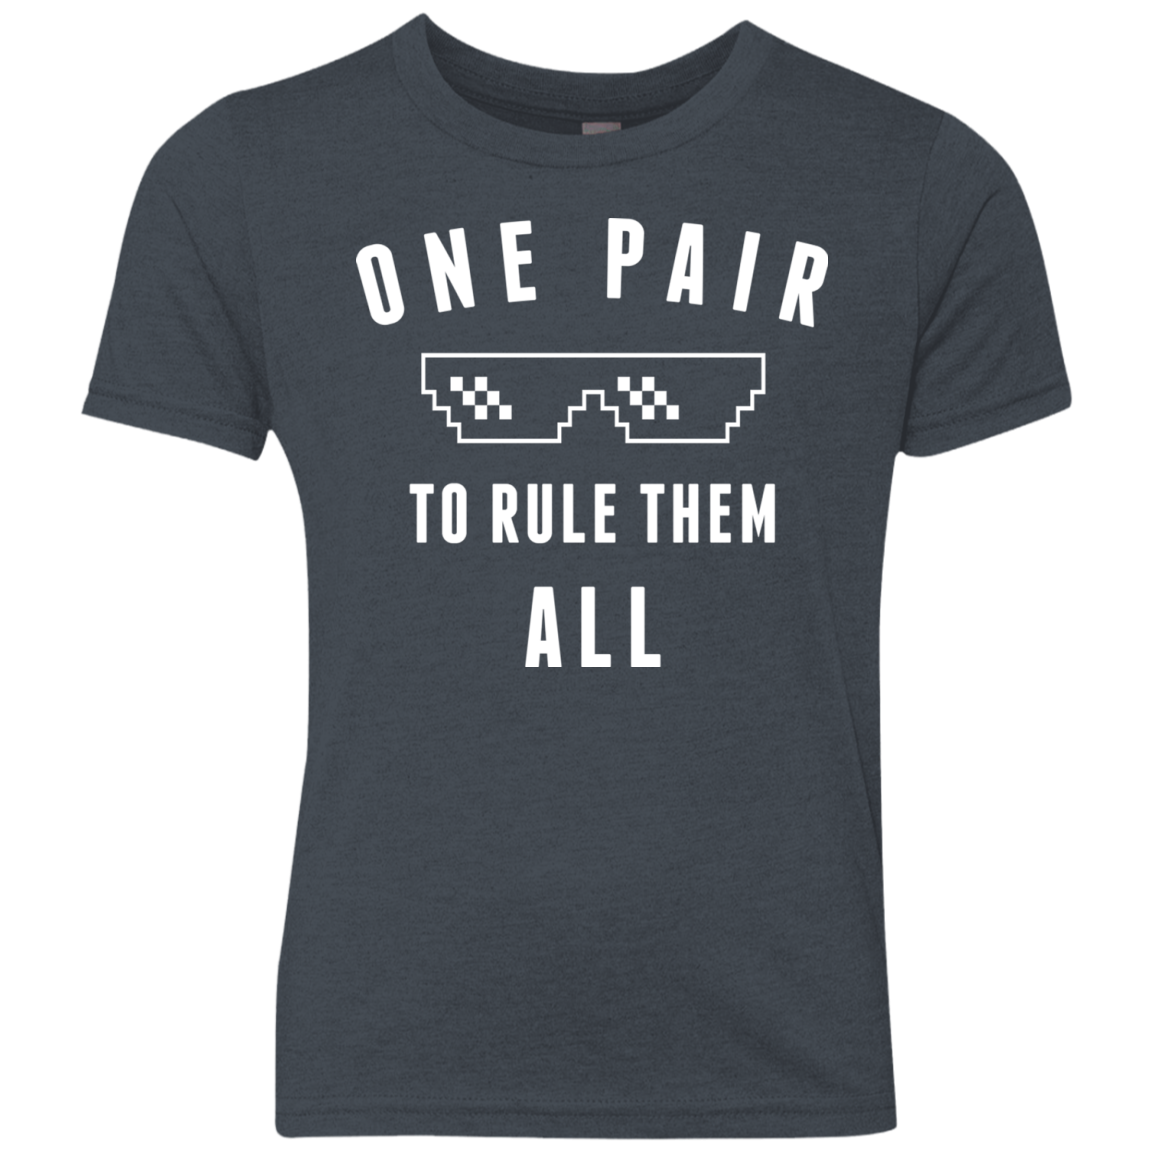 One pair Youth Triblend T-Shirt